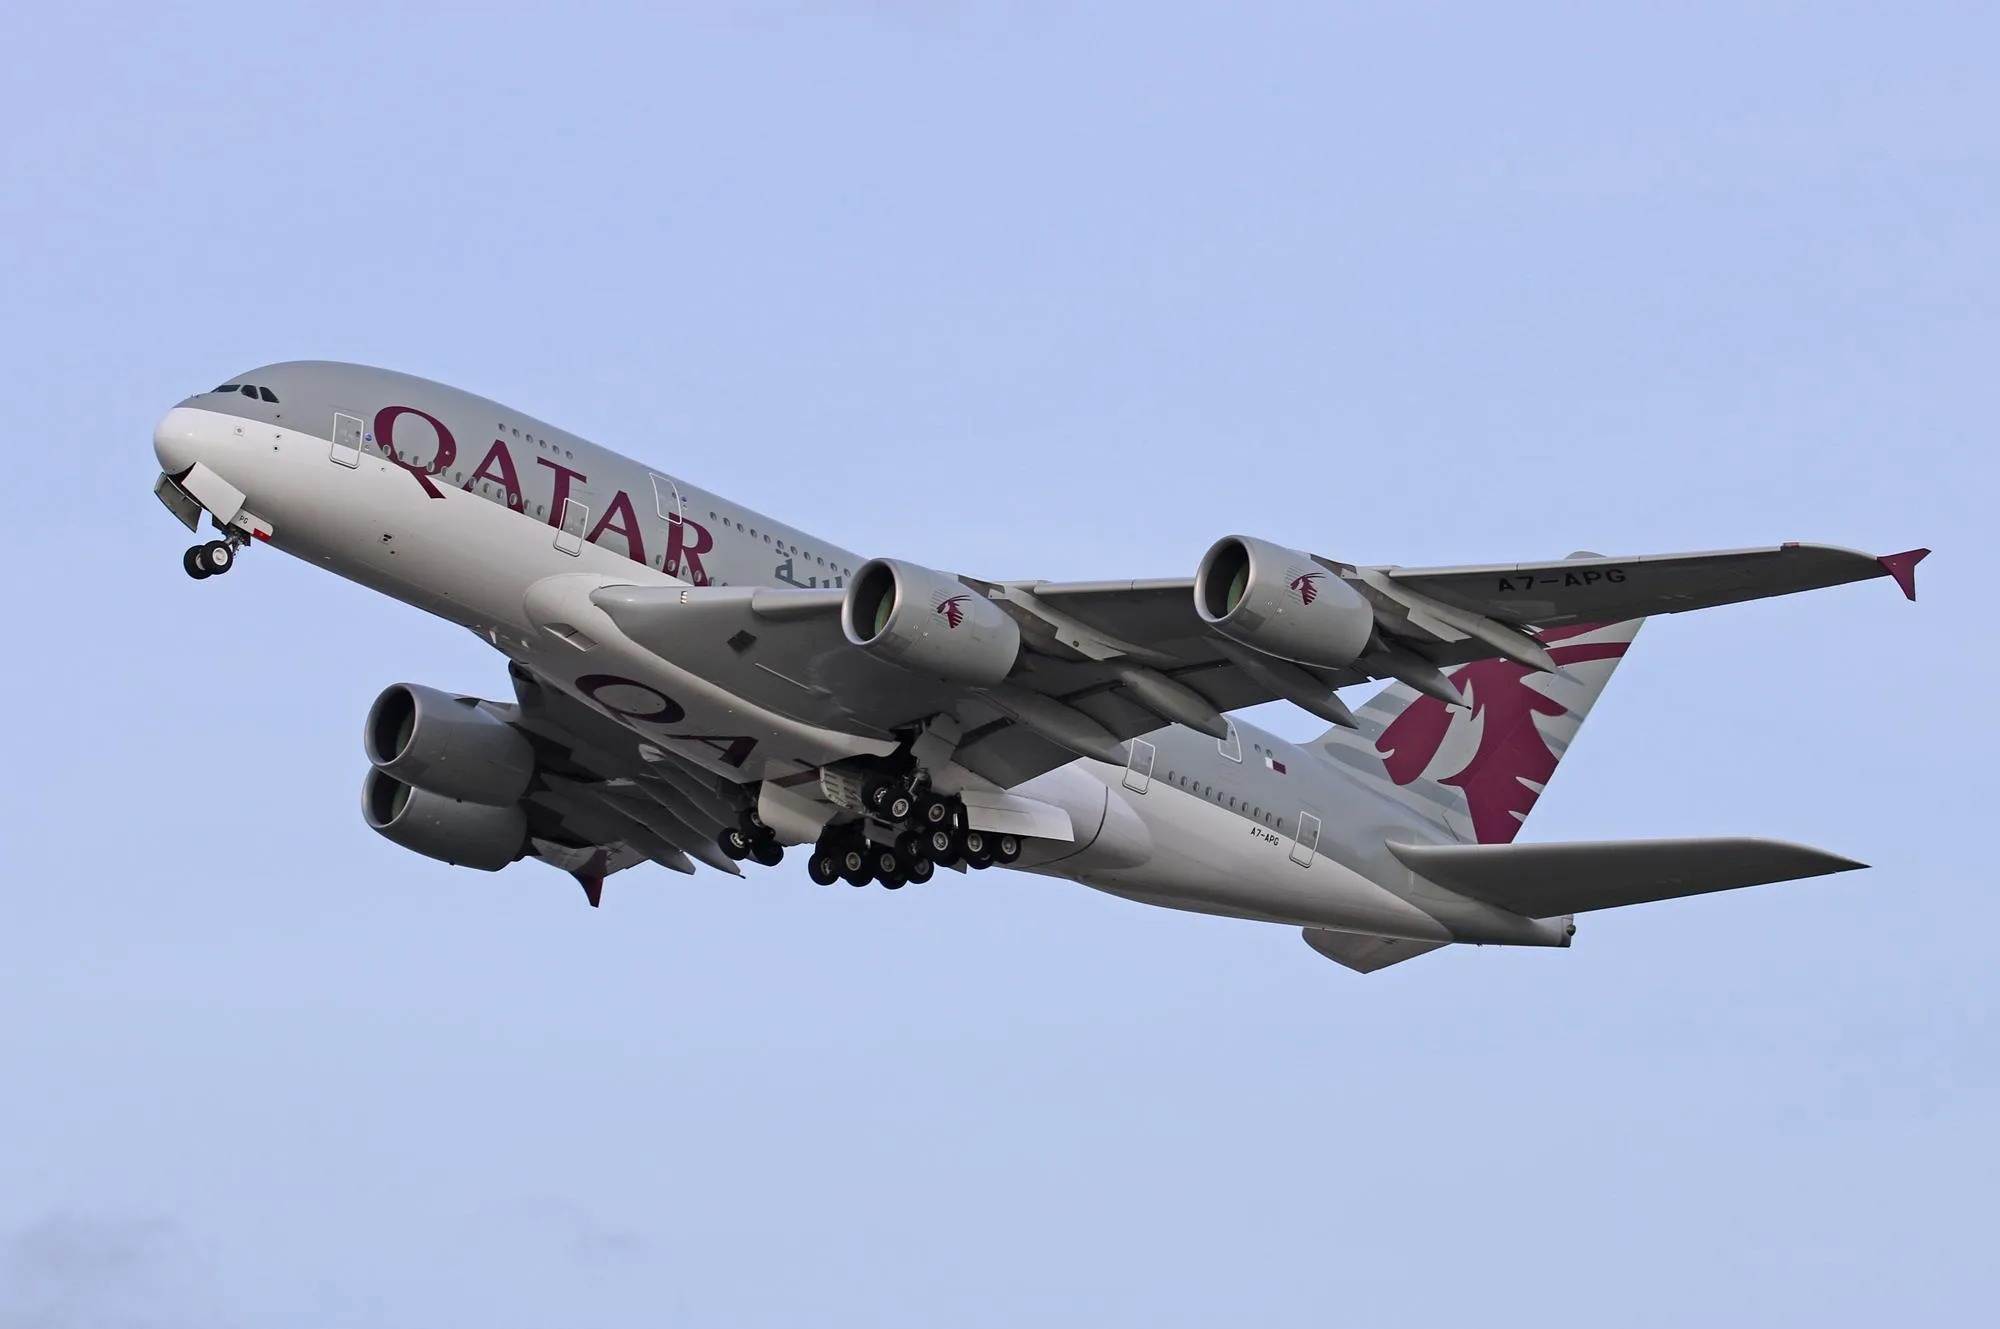 Important news related to Qatar Airways has come out